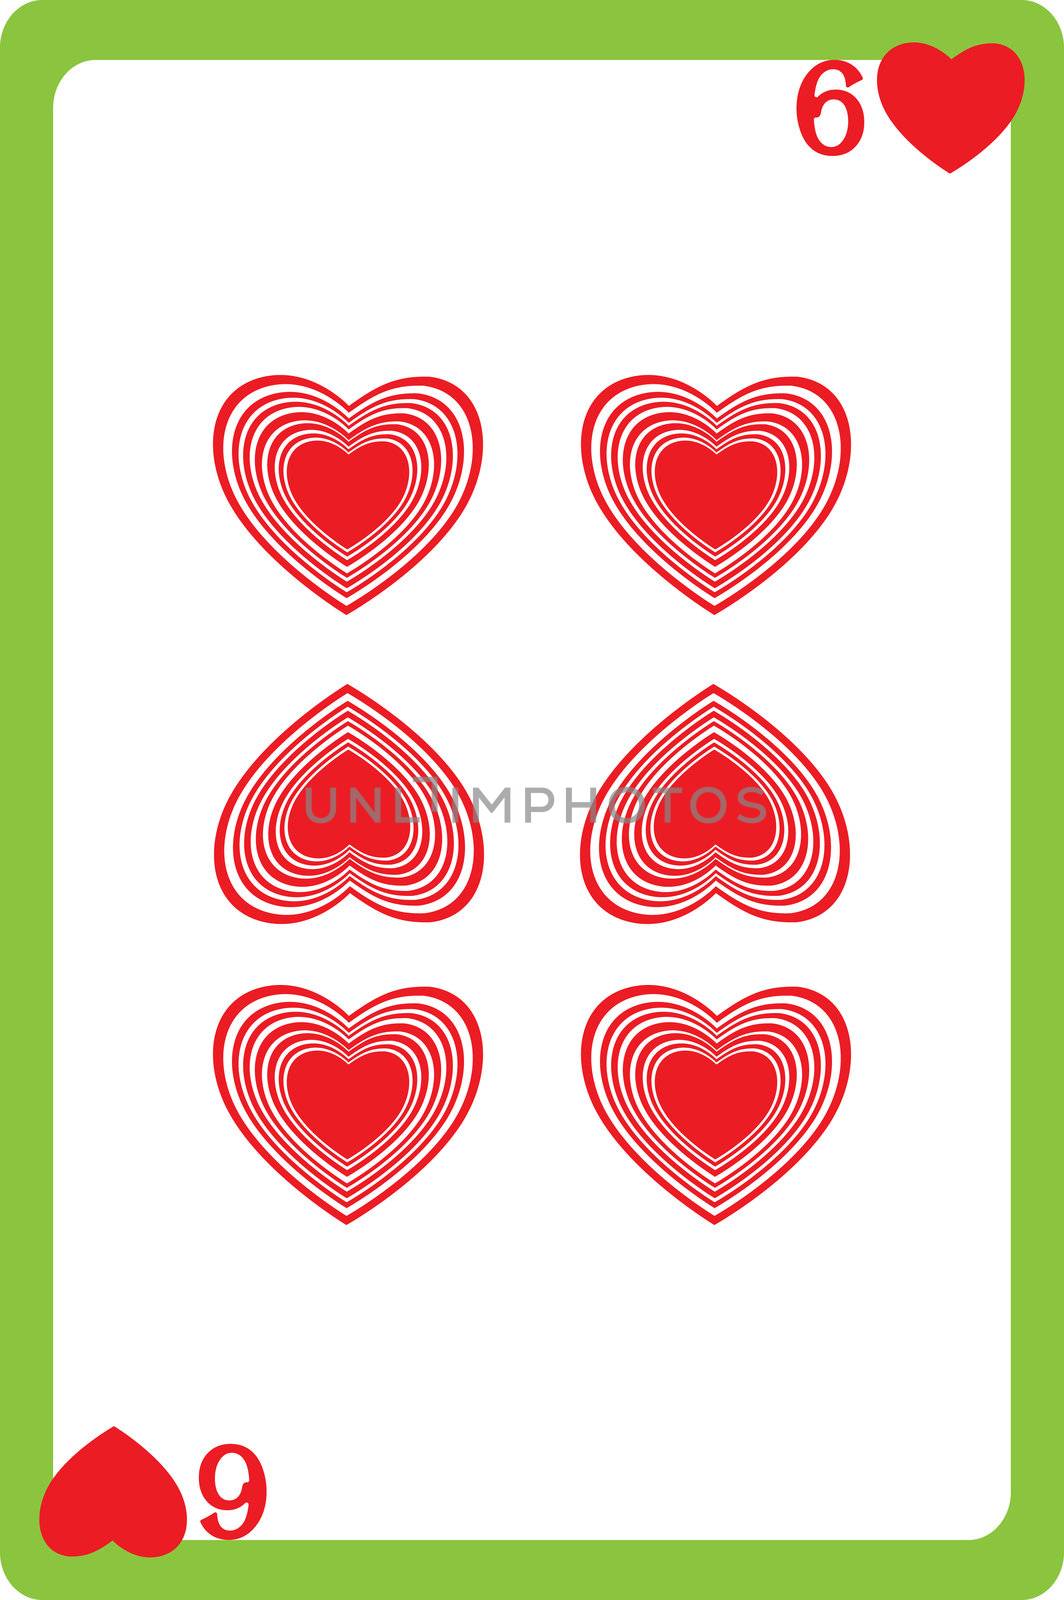 Scale hand drawn illustration of a playing card representing the six of hearts, one element of a deck